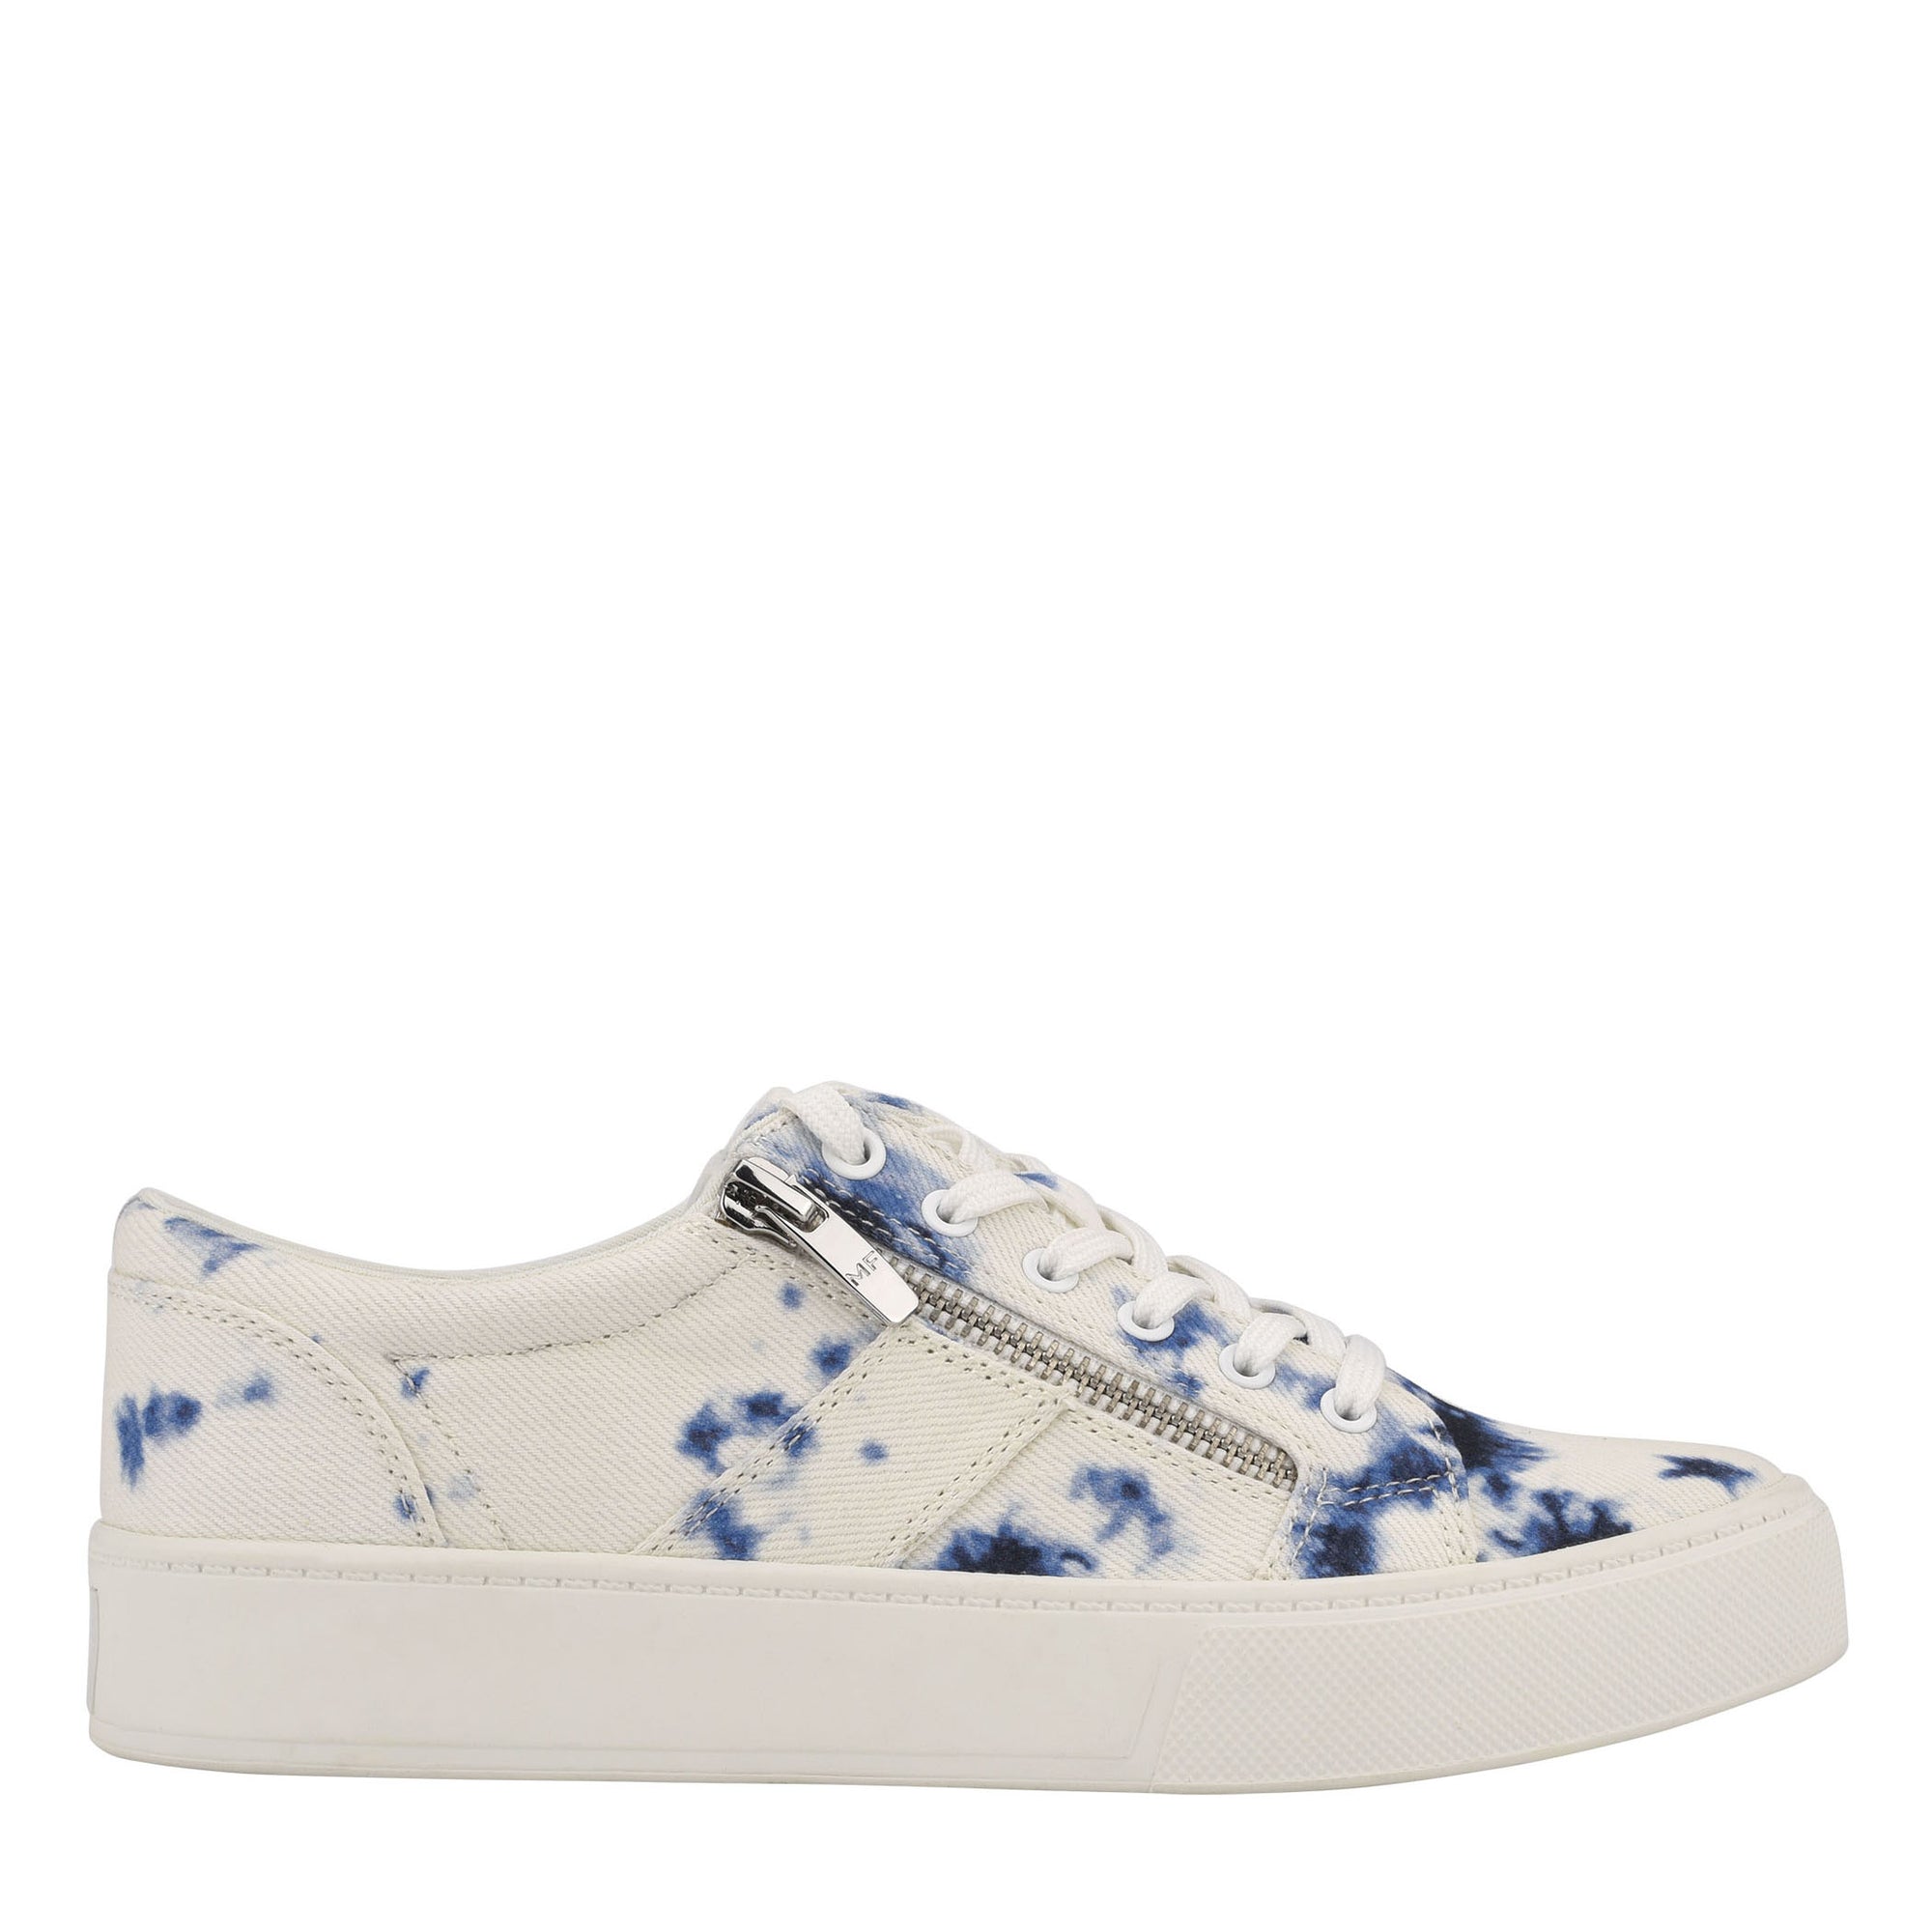 marc fisher white sneakers